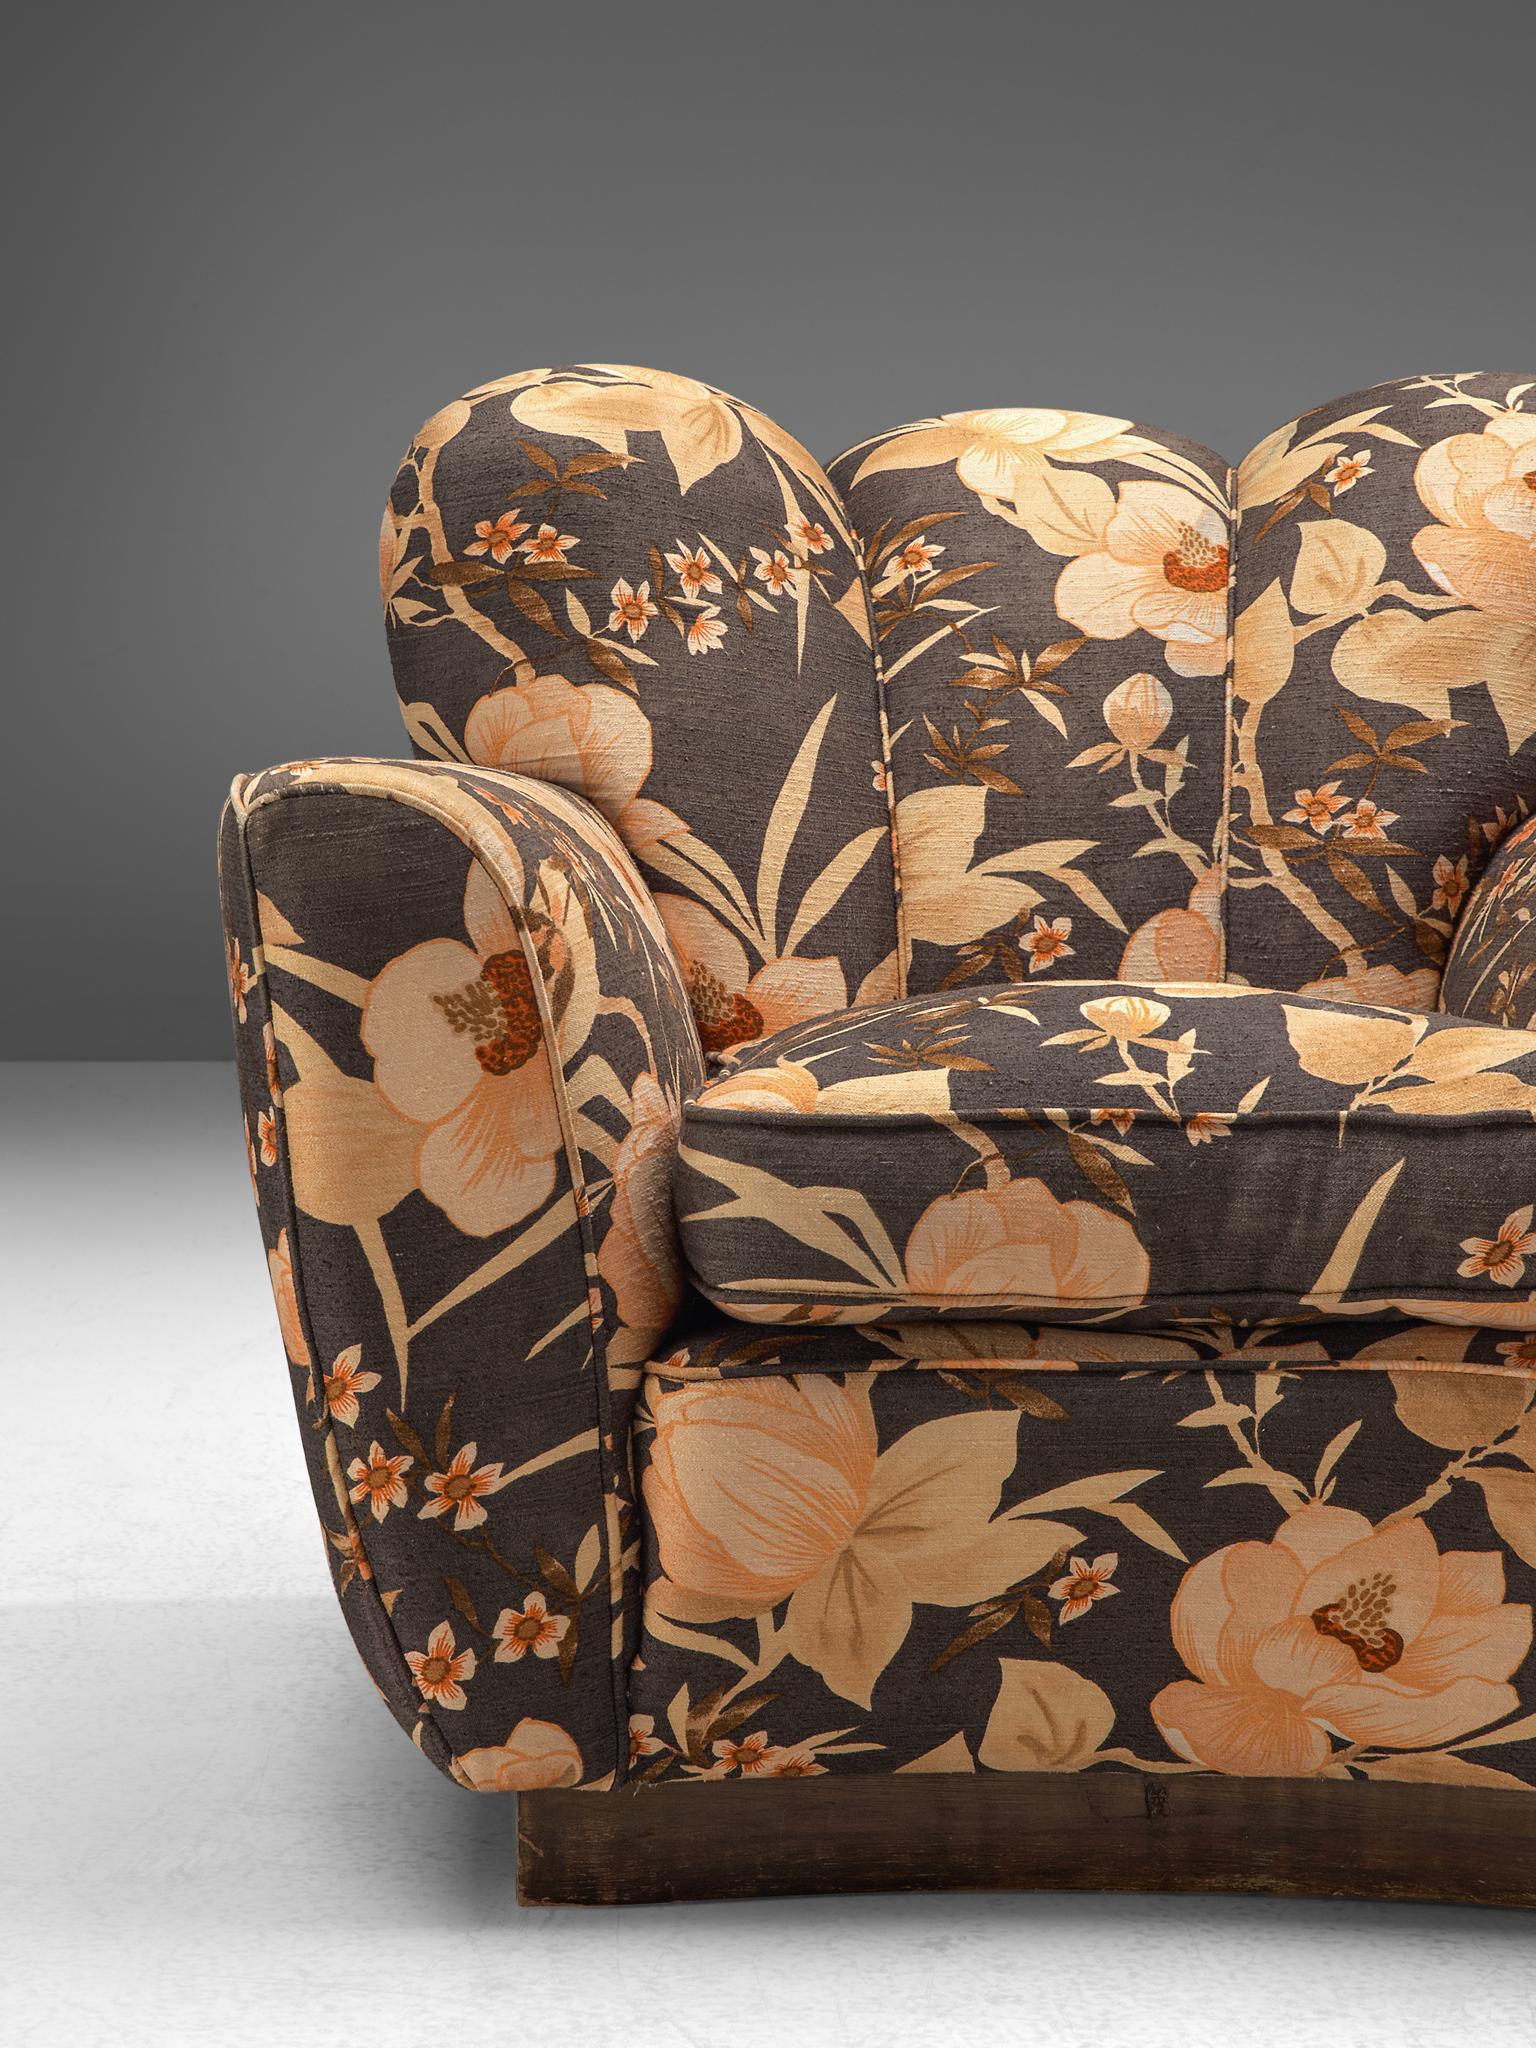 Italian Pair of Lounge Chairs in Floral Upholstery by Molteni (Mitte des 20. Jahrhunderts)